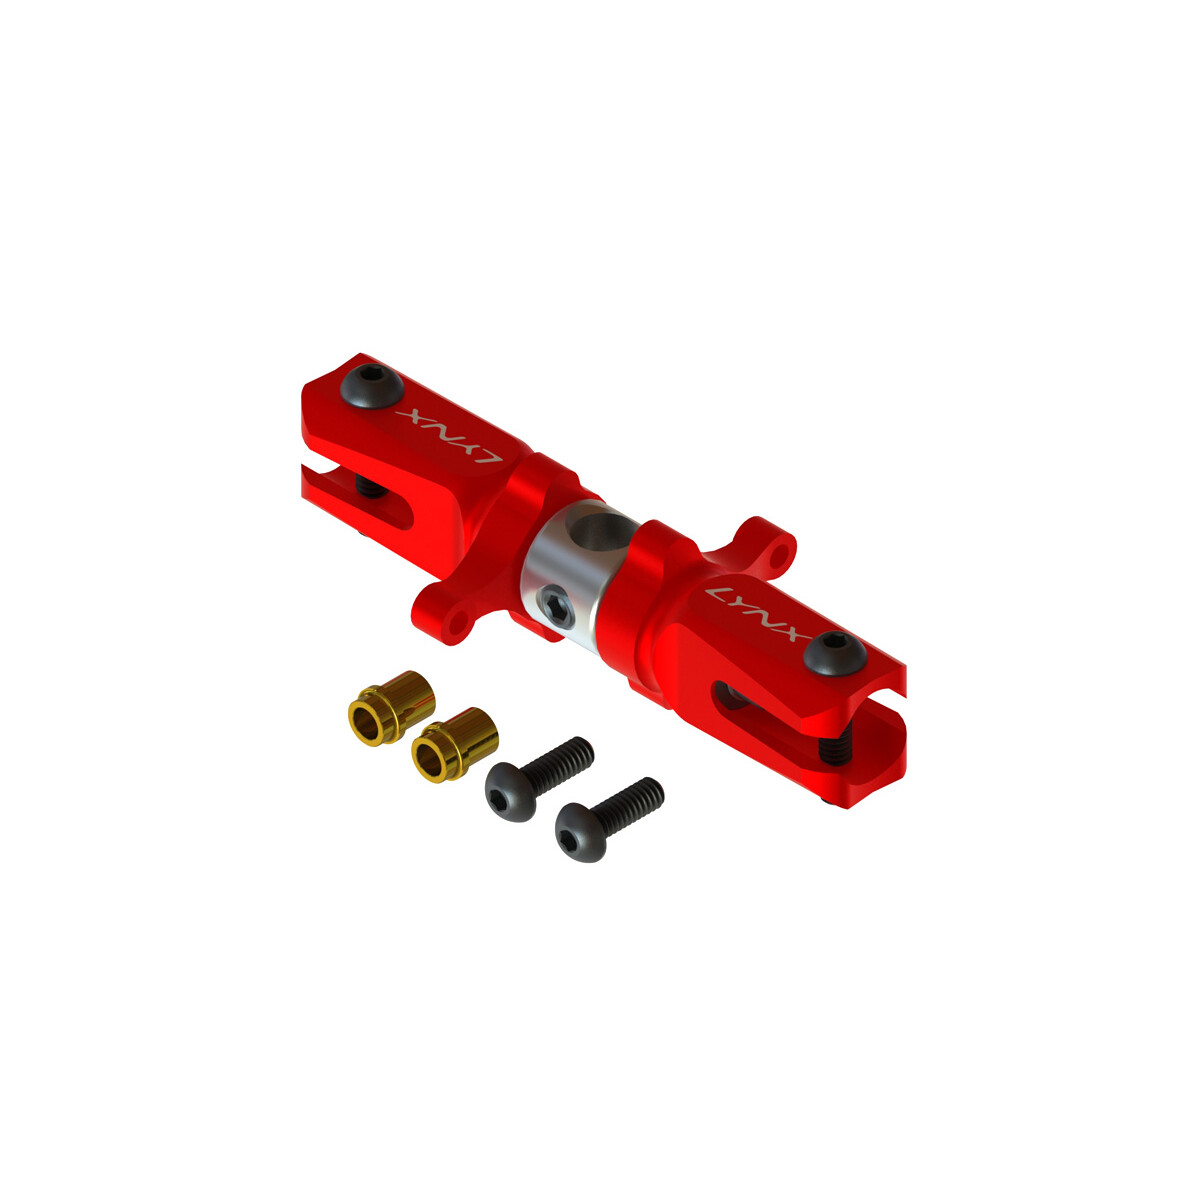 LX1455 - Forza 450 - Ultra Tail Rotor Hub - Thrusted - Red